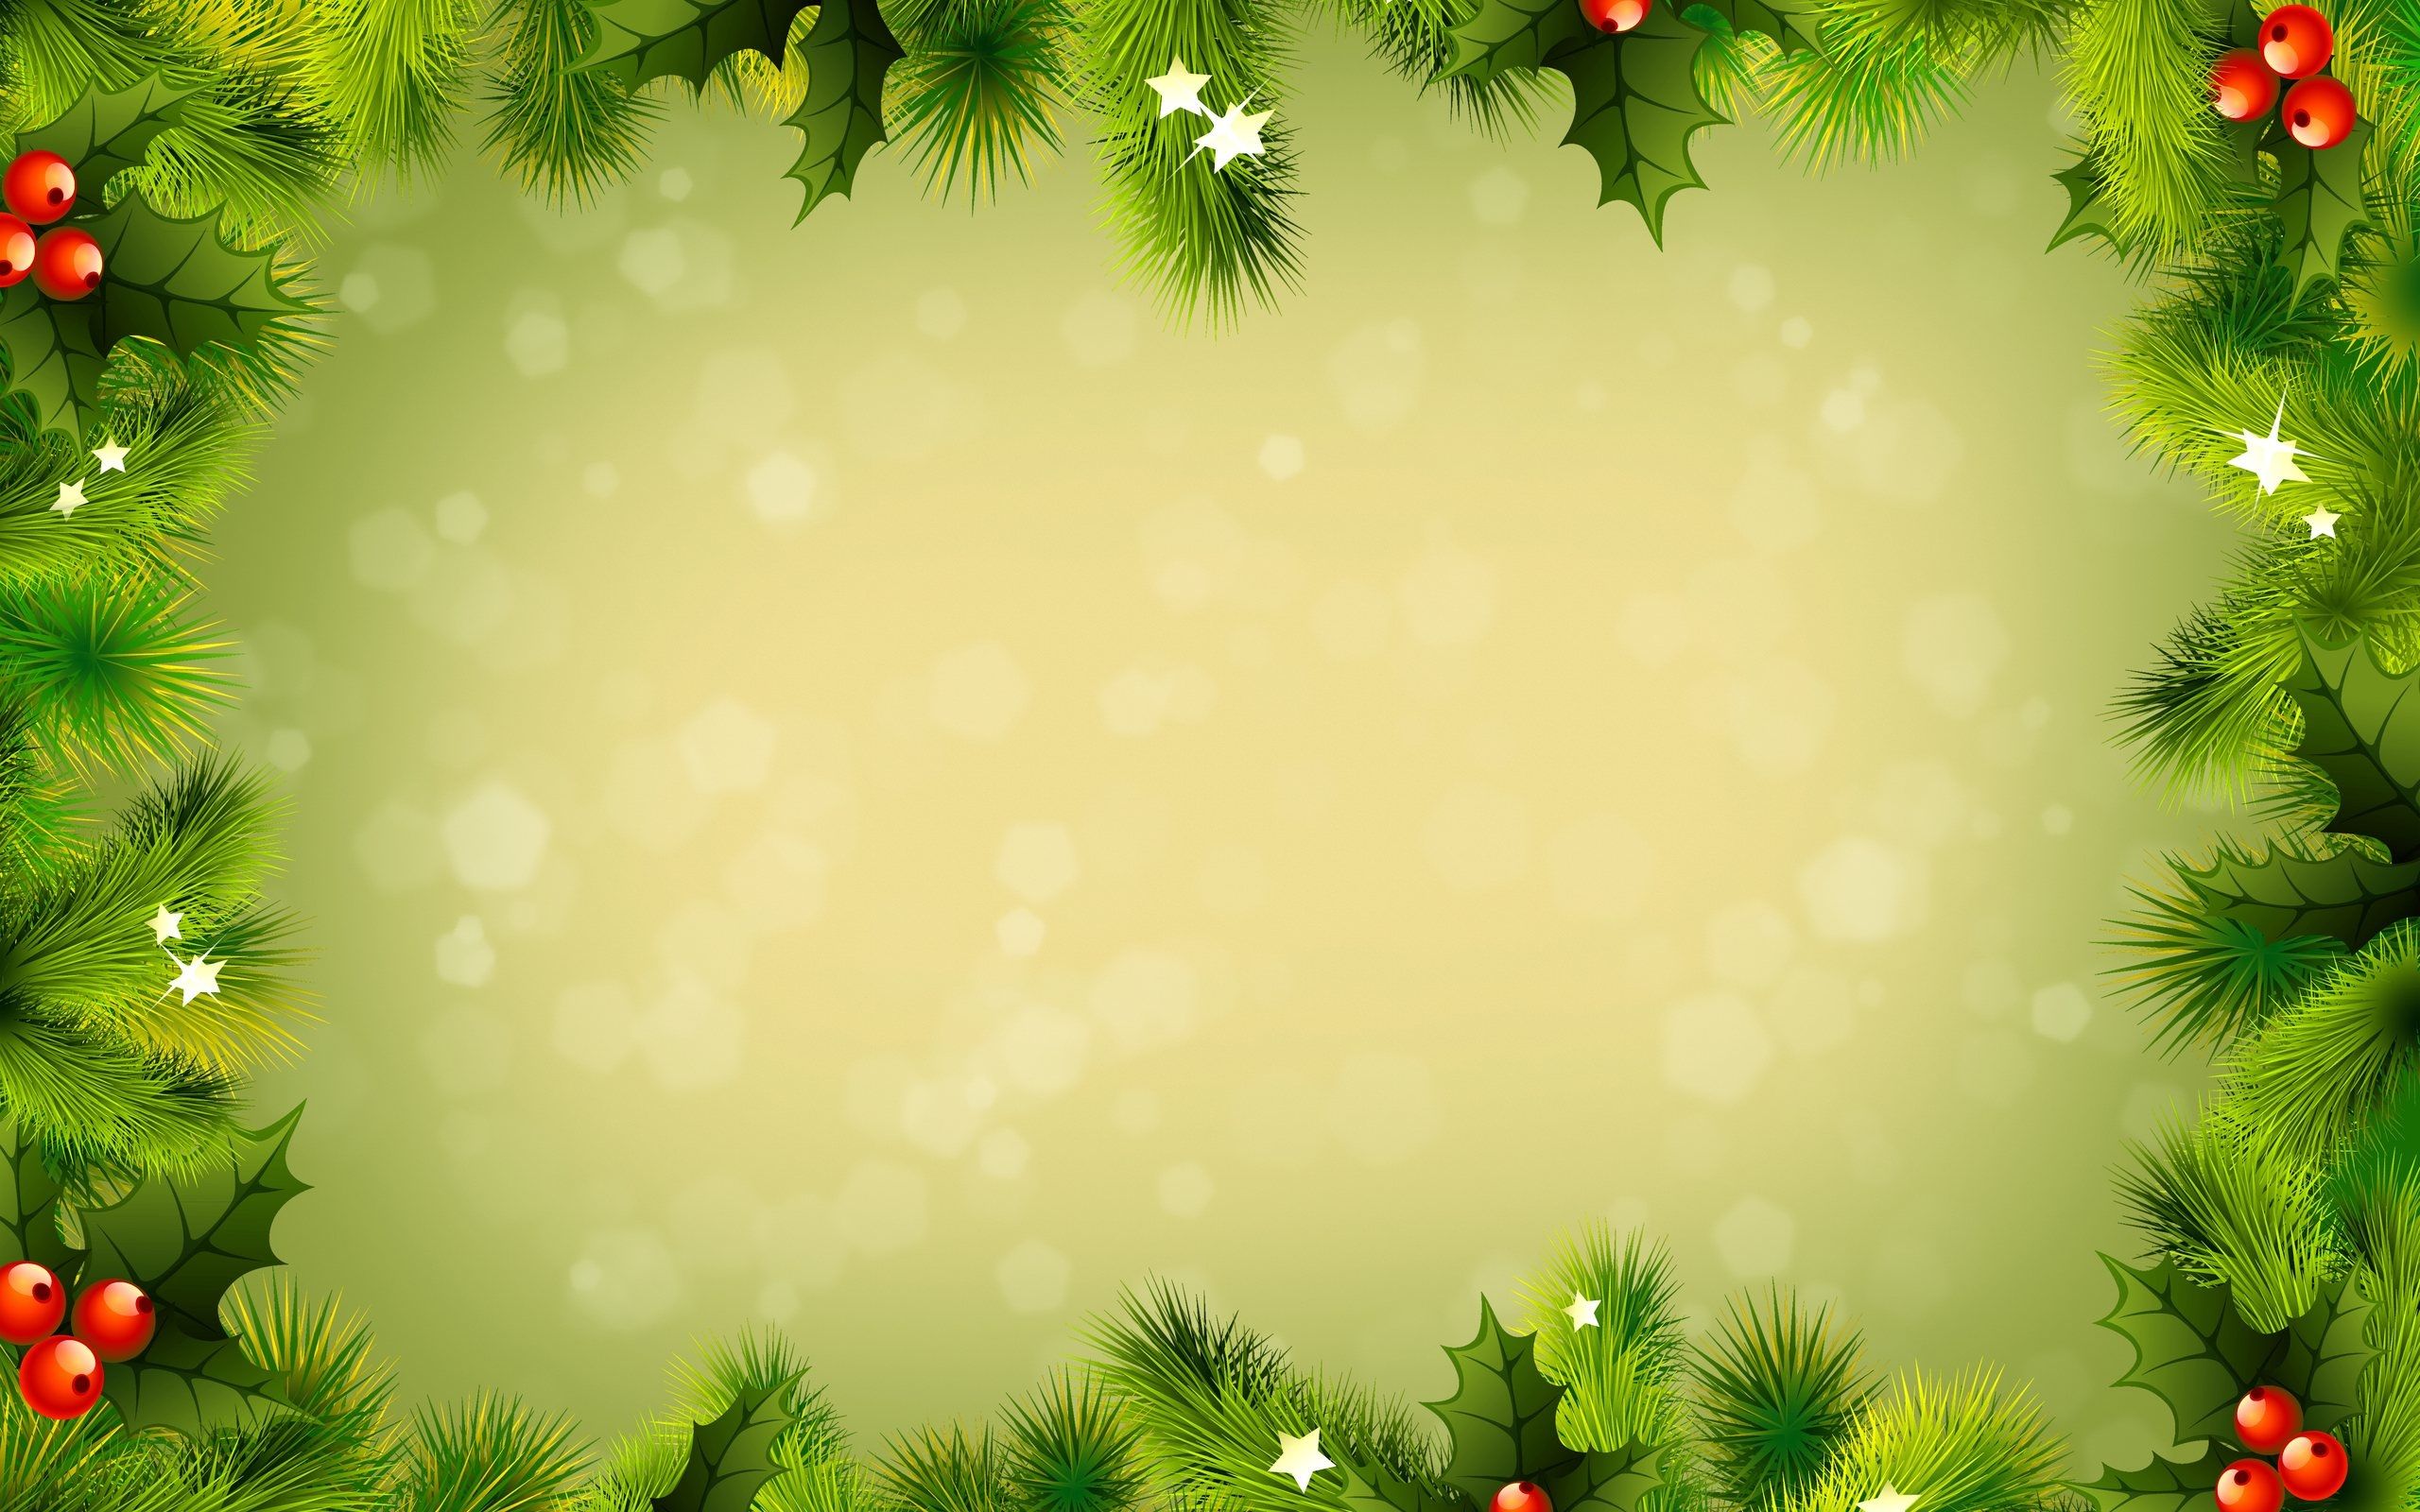 Wallpaper Background For Christmas Picserio